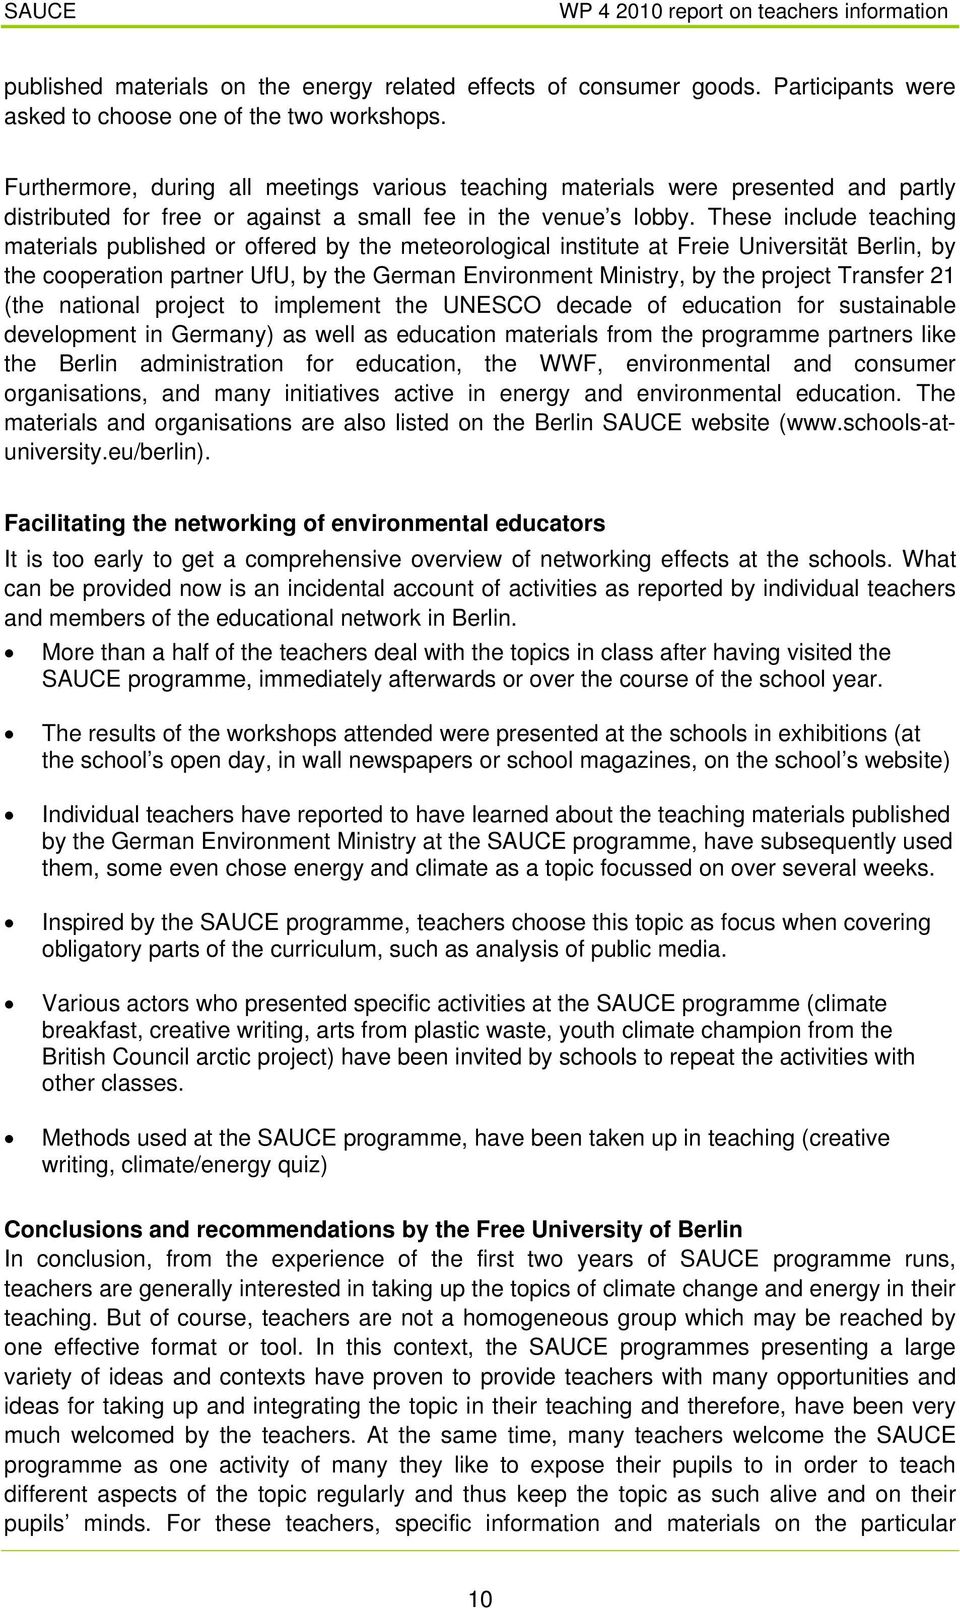 These include teaching materials published or offered by the meteorological institute at Freie Universität Berlin, by the cooperation partner UfU, by the German Environment Ministry, by the project